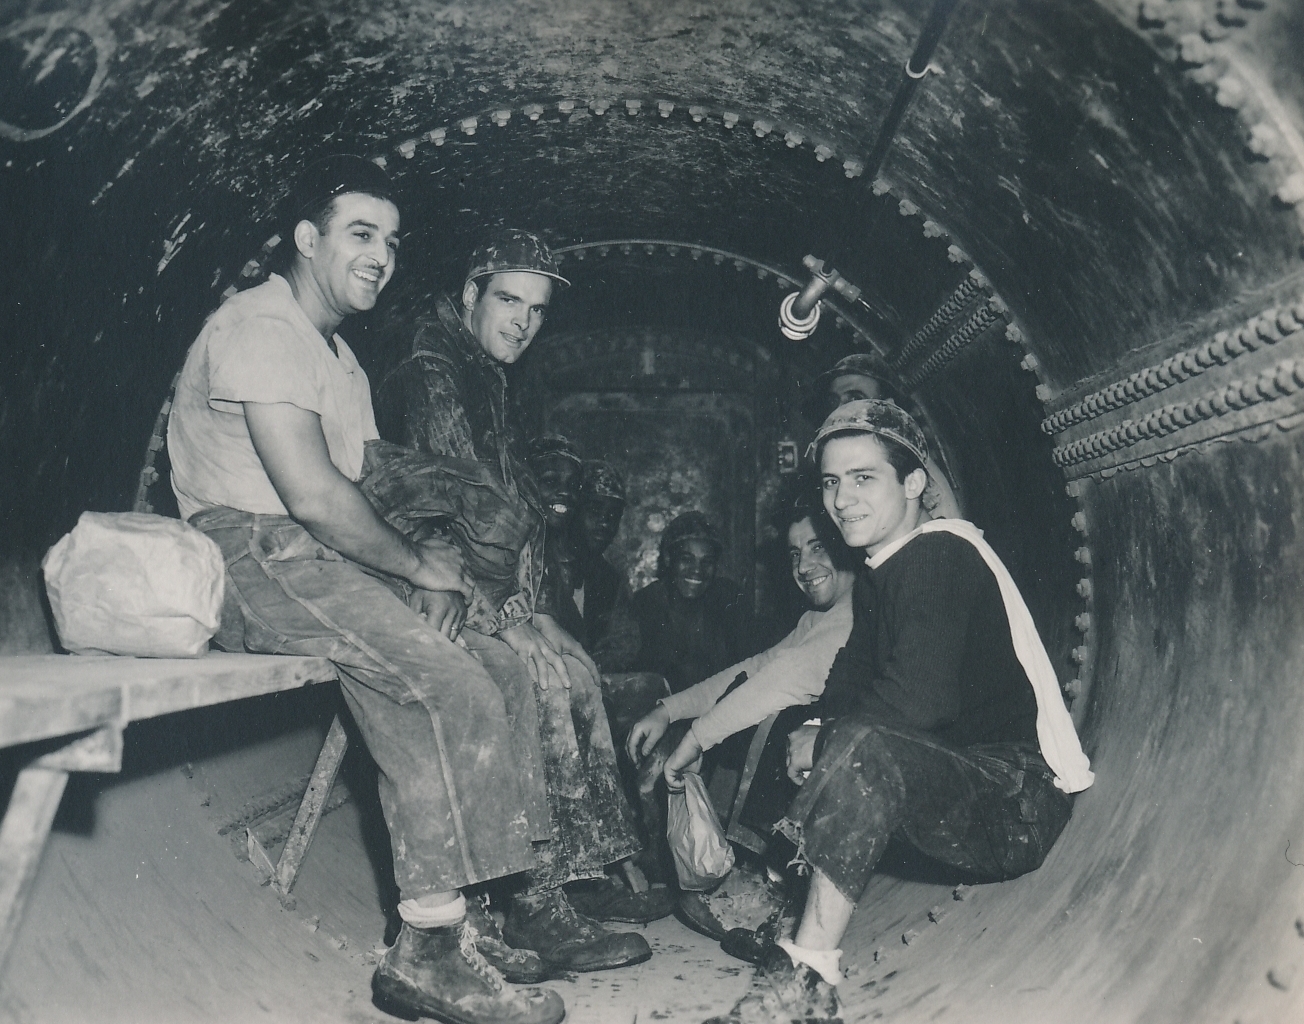 PWA funded good-paying jobs, and good-paying jobs created smiles – it wasn’t rocket science. Photo shows a PWA-financed subway project in Chicago. Photo courtesy of the National Archives (June 1940).